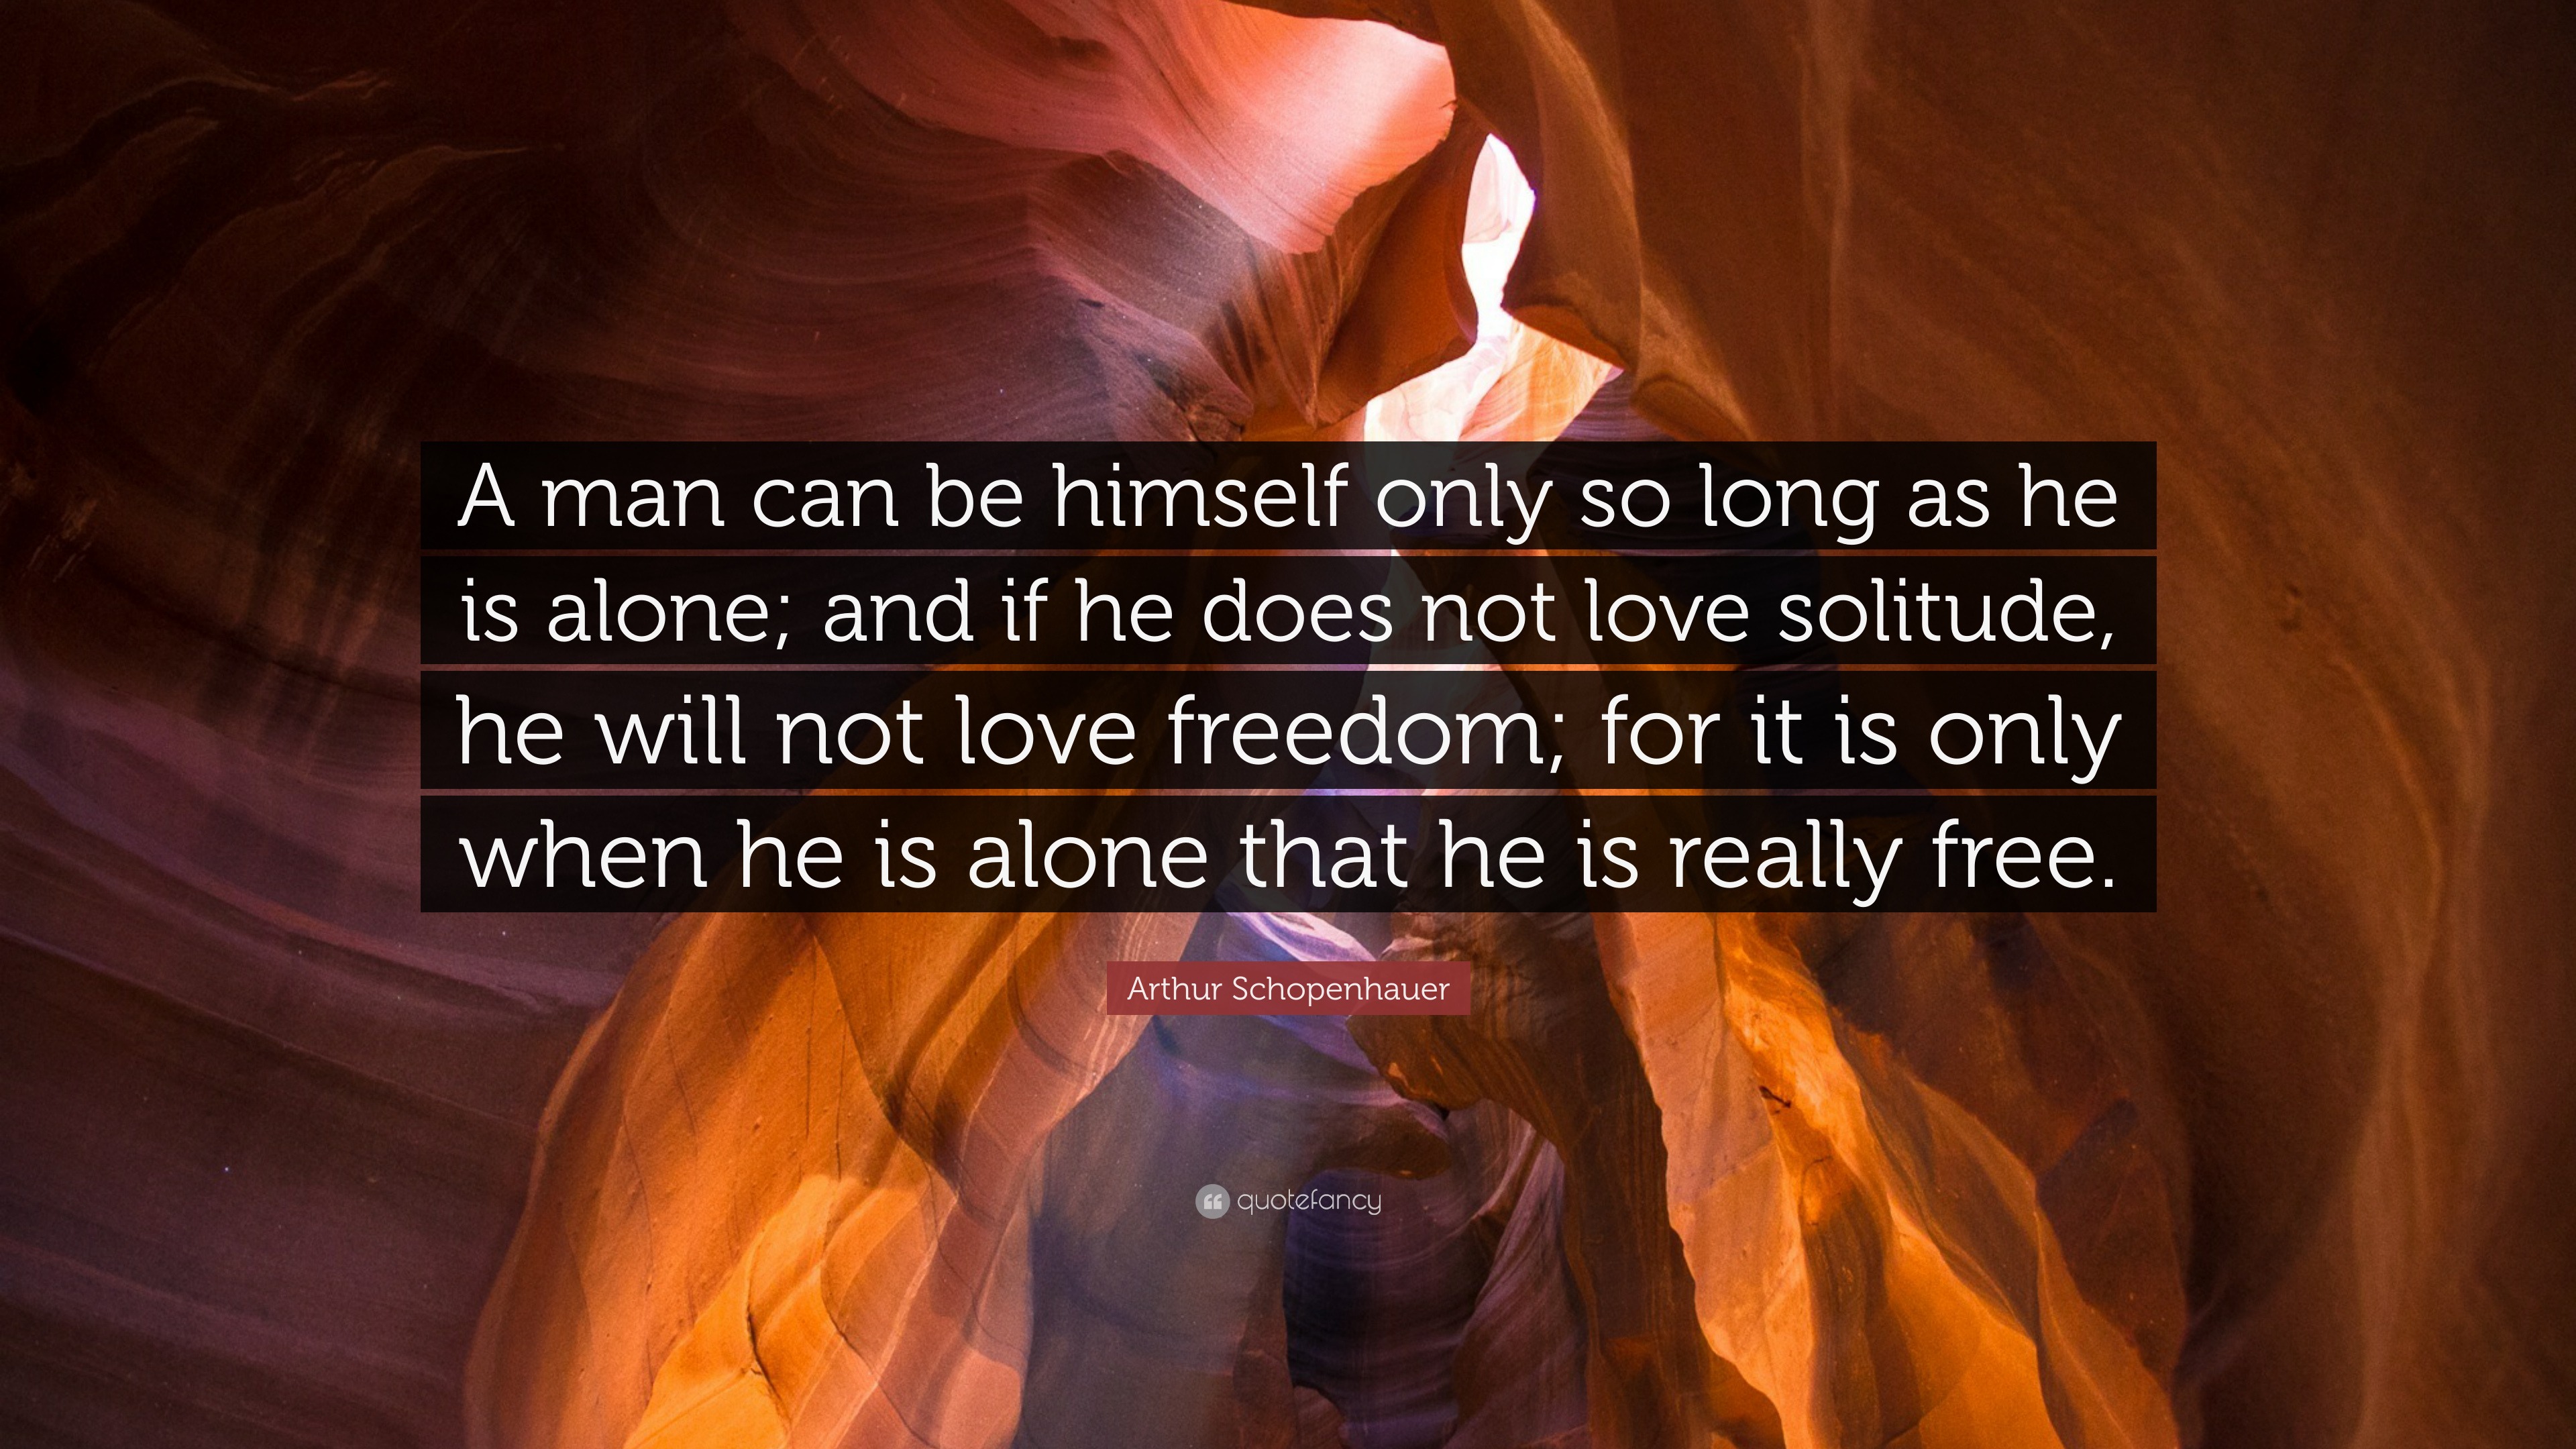 Arthur Schopenhauer Quote: “A man can be himself only so long as he is ...